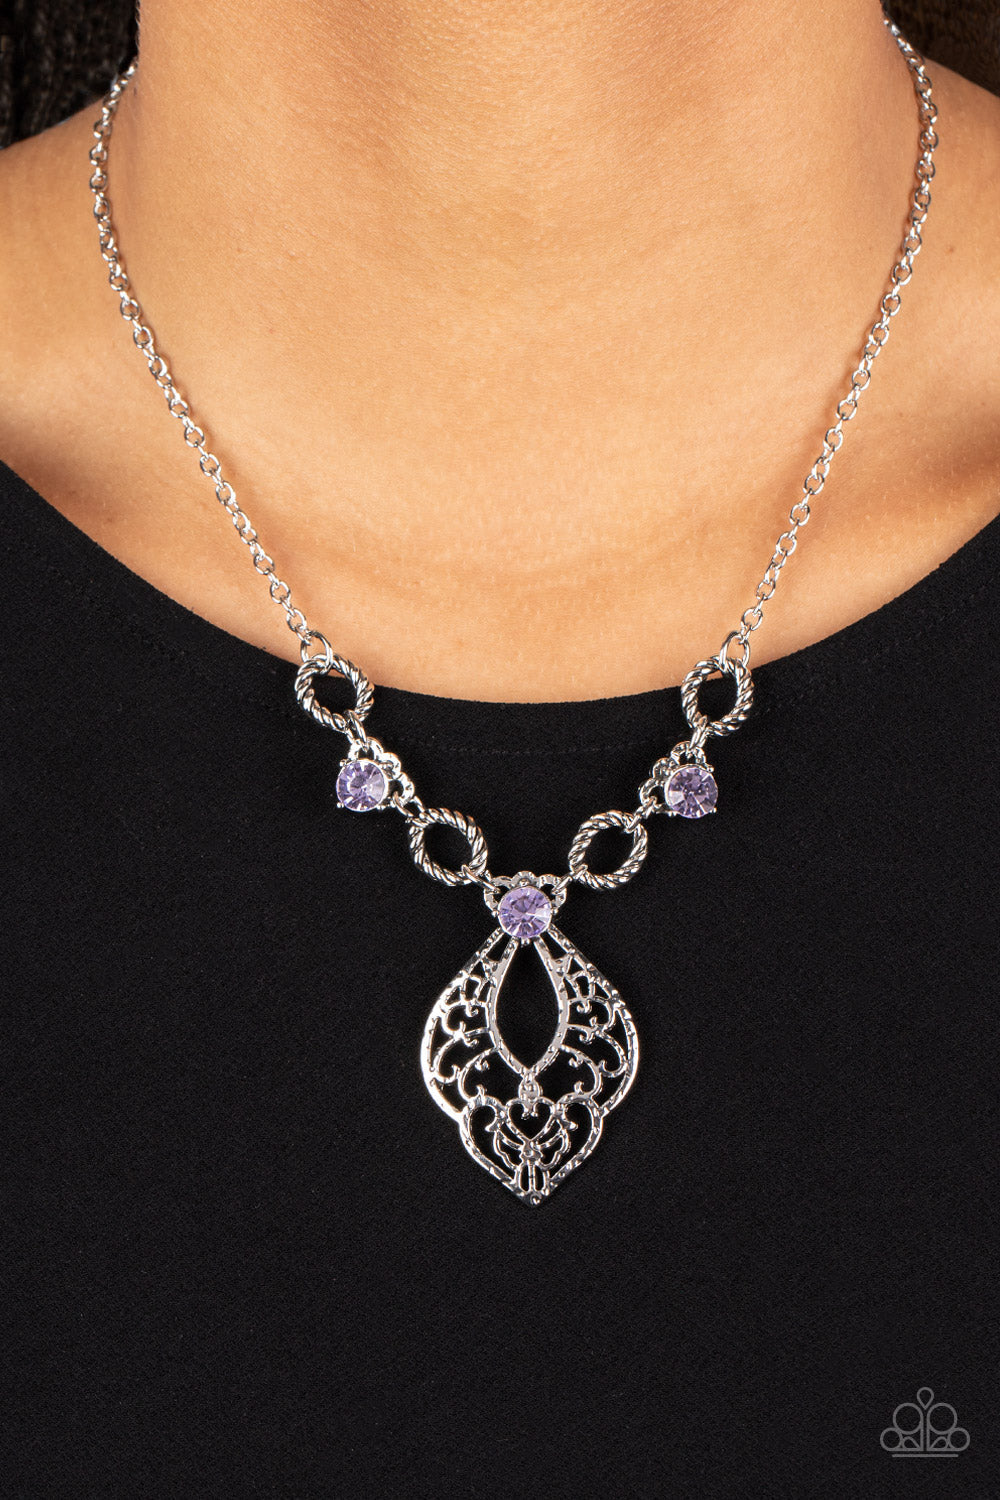 Contemporary Connections - Purple and Silver Necklace - Twisted silver links and oversized purple rhinestones delicately alternate below the collar. A hammered filigree filled silver pendant shimmers from the bottom of the centermost rhinestone, creating a contemporary pendant. Features an adjustable clasp closure. Sold as one individual necklace.